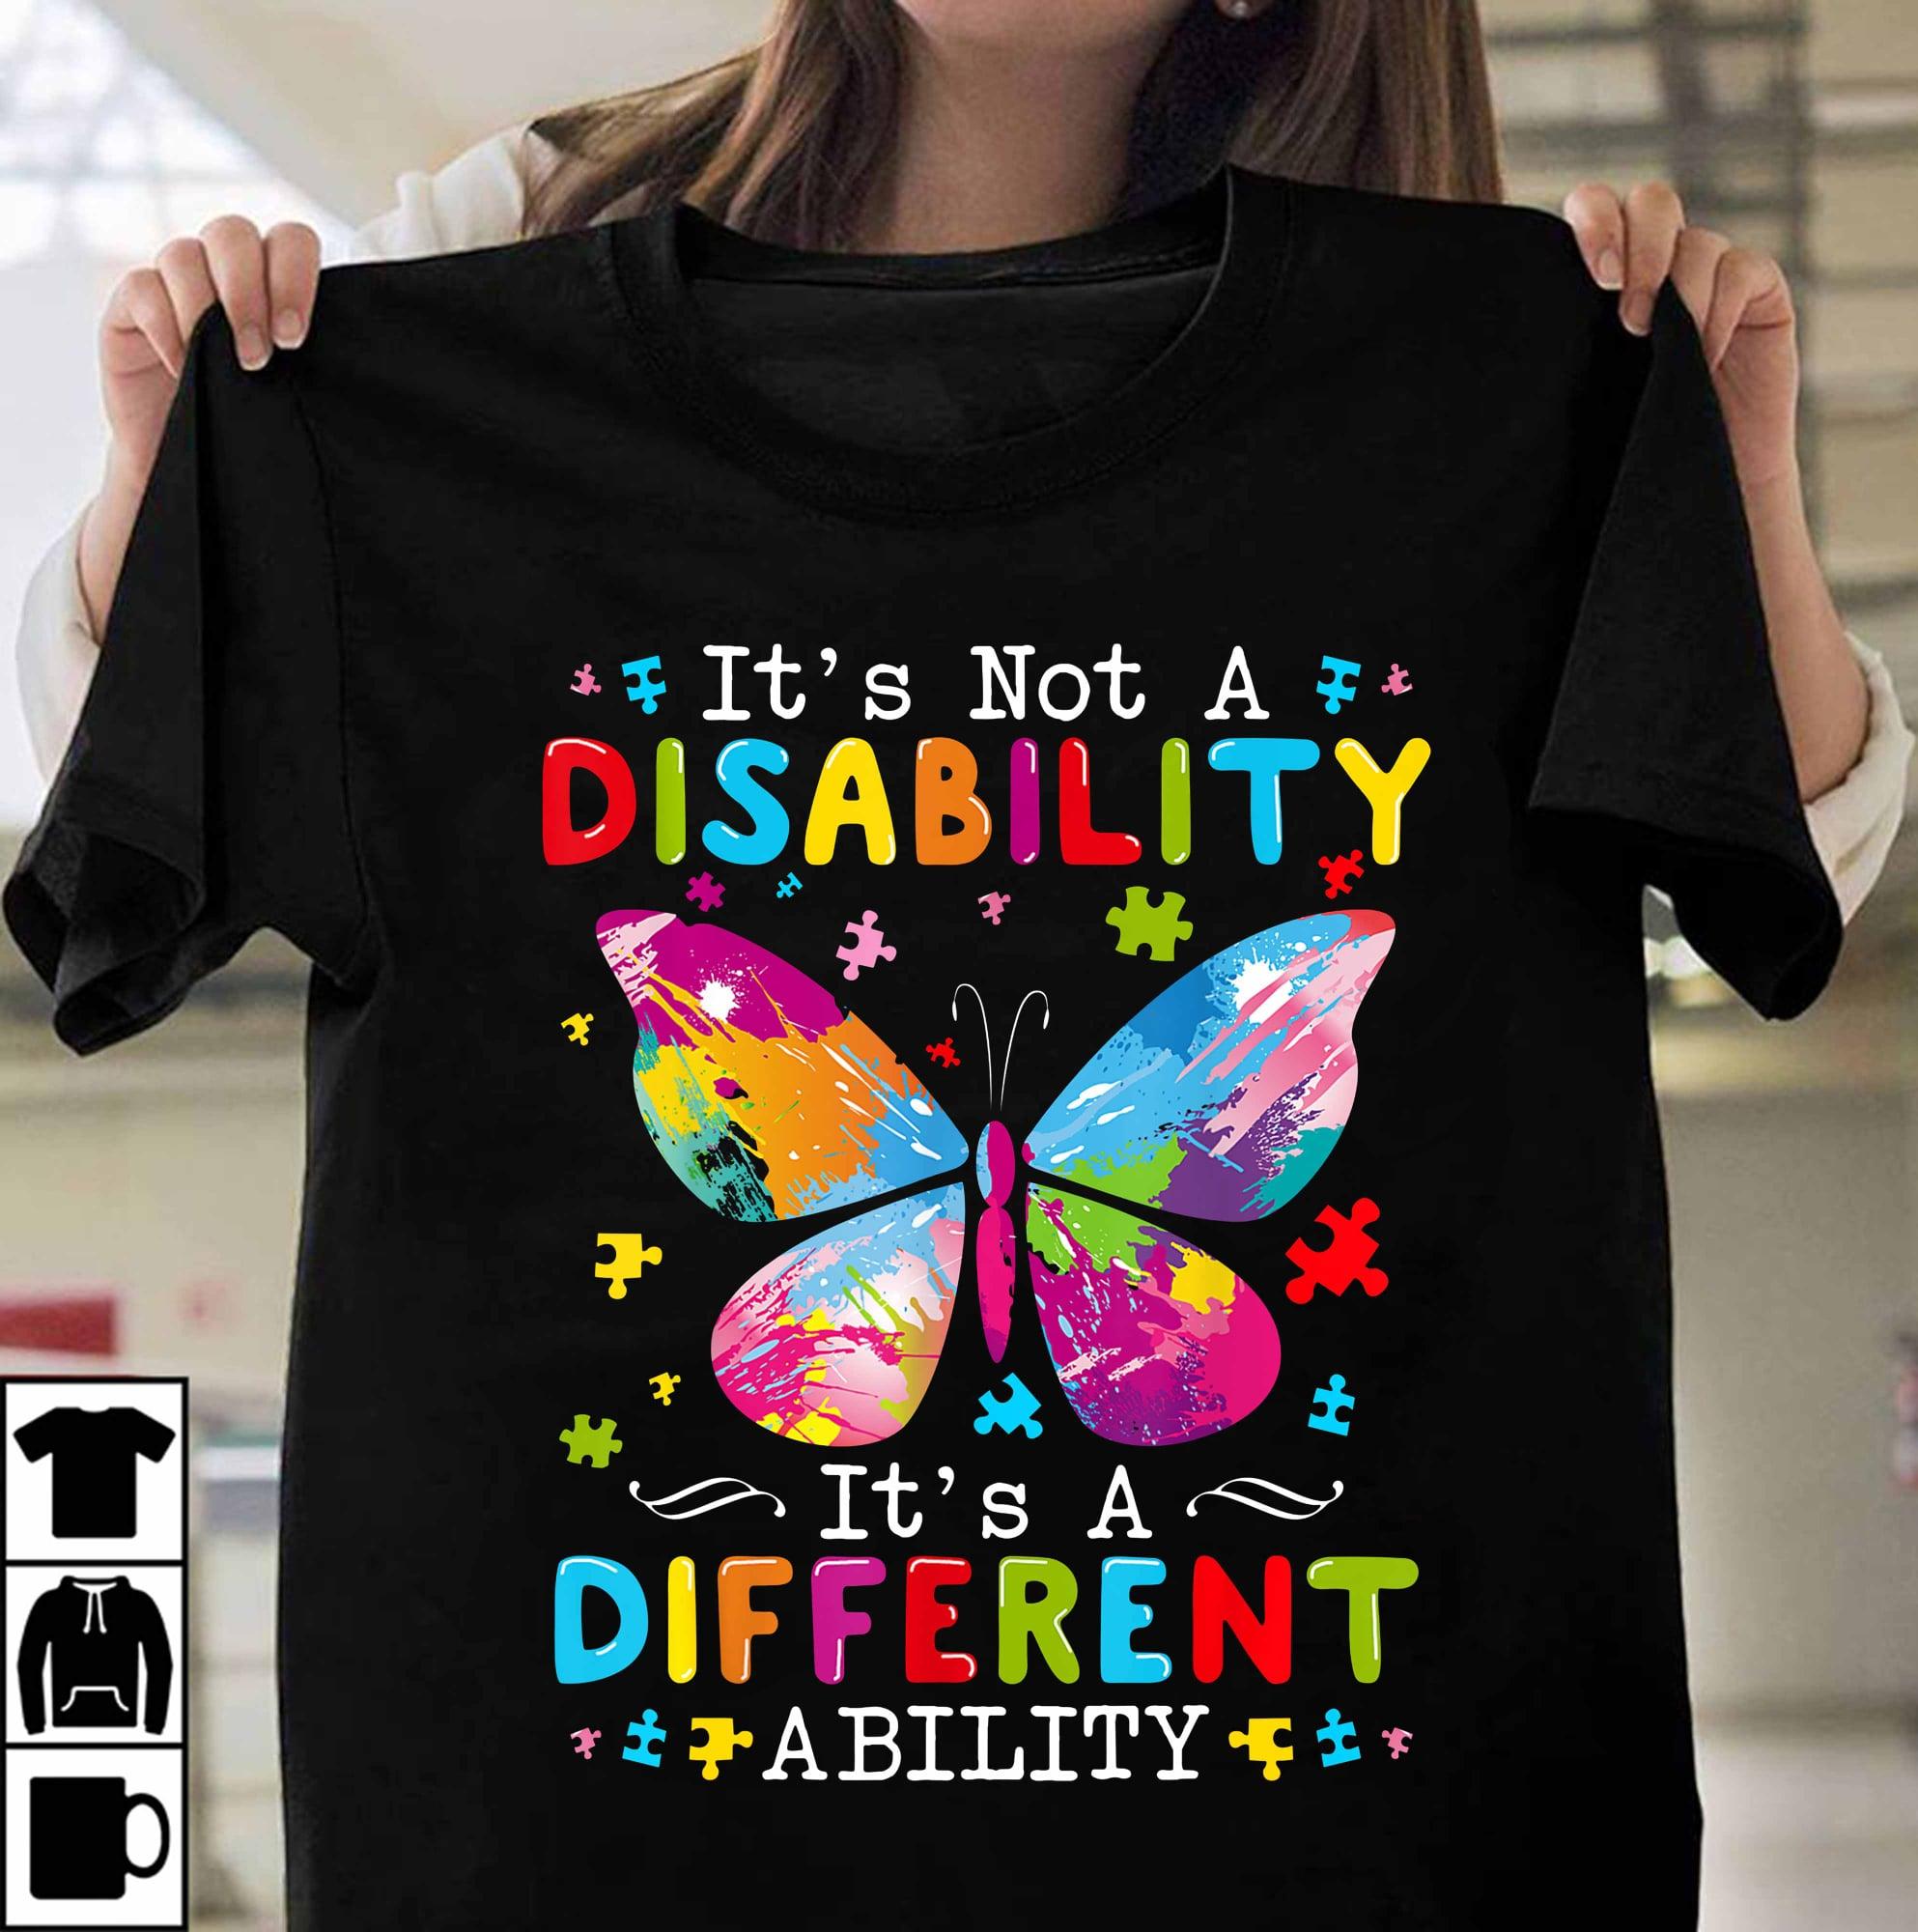 It's not a disability It's a different ability - Autism awareness, colorful butterfly graphic T-shirt